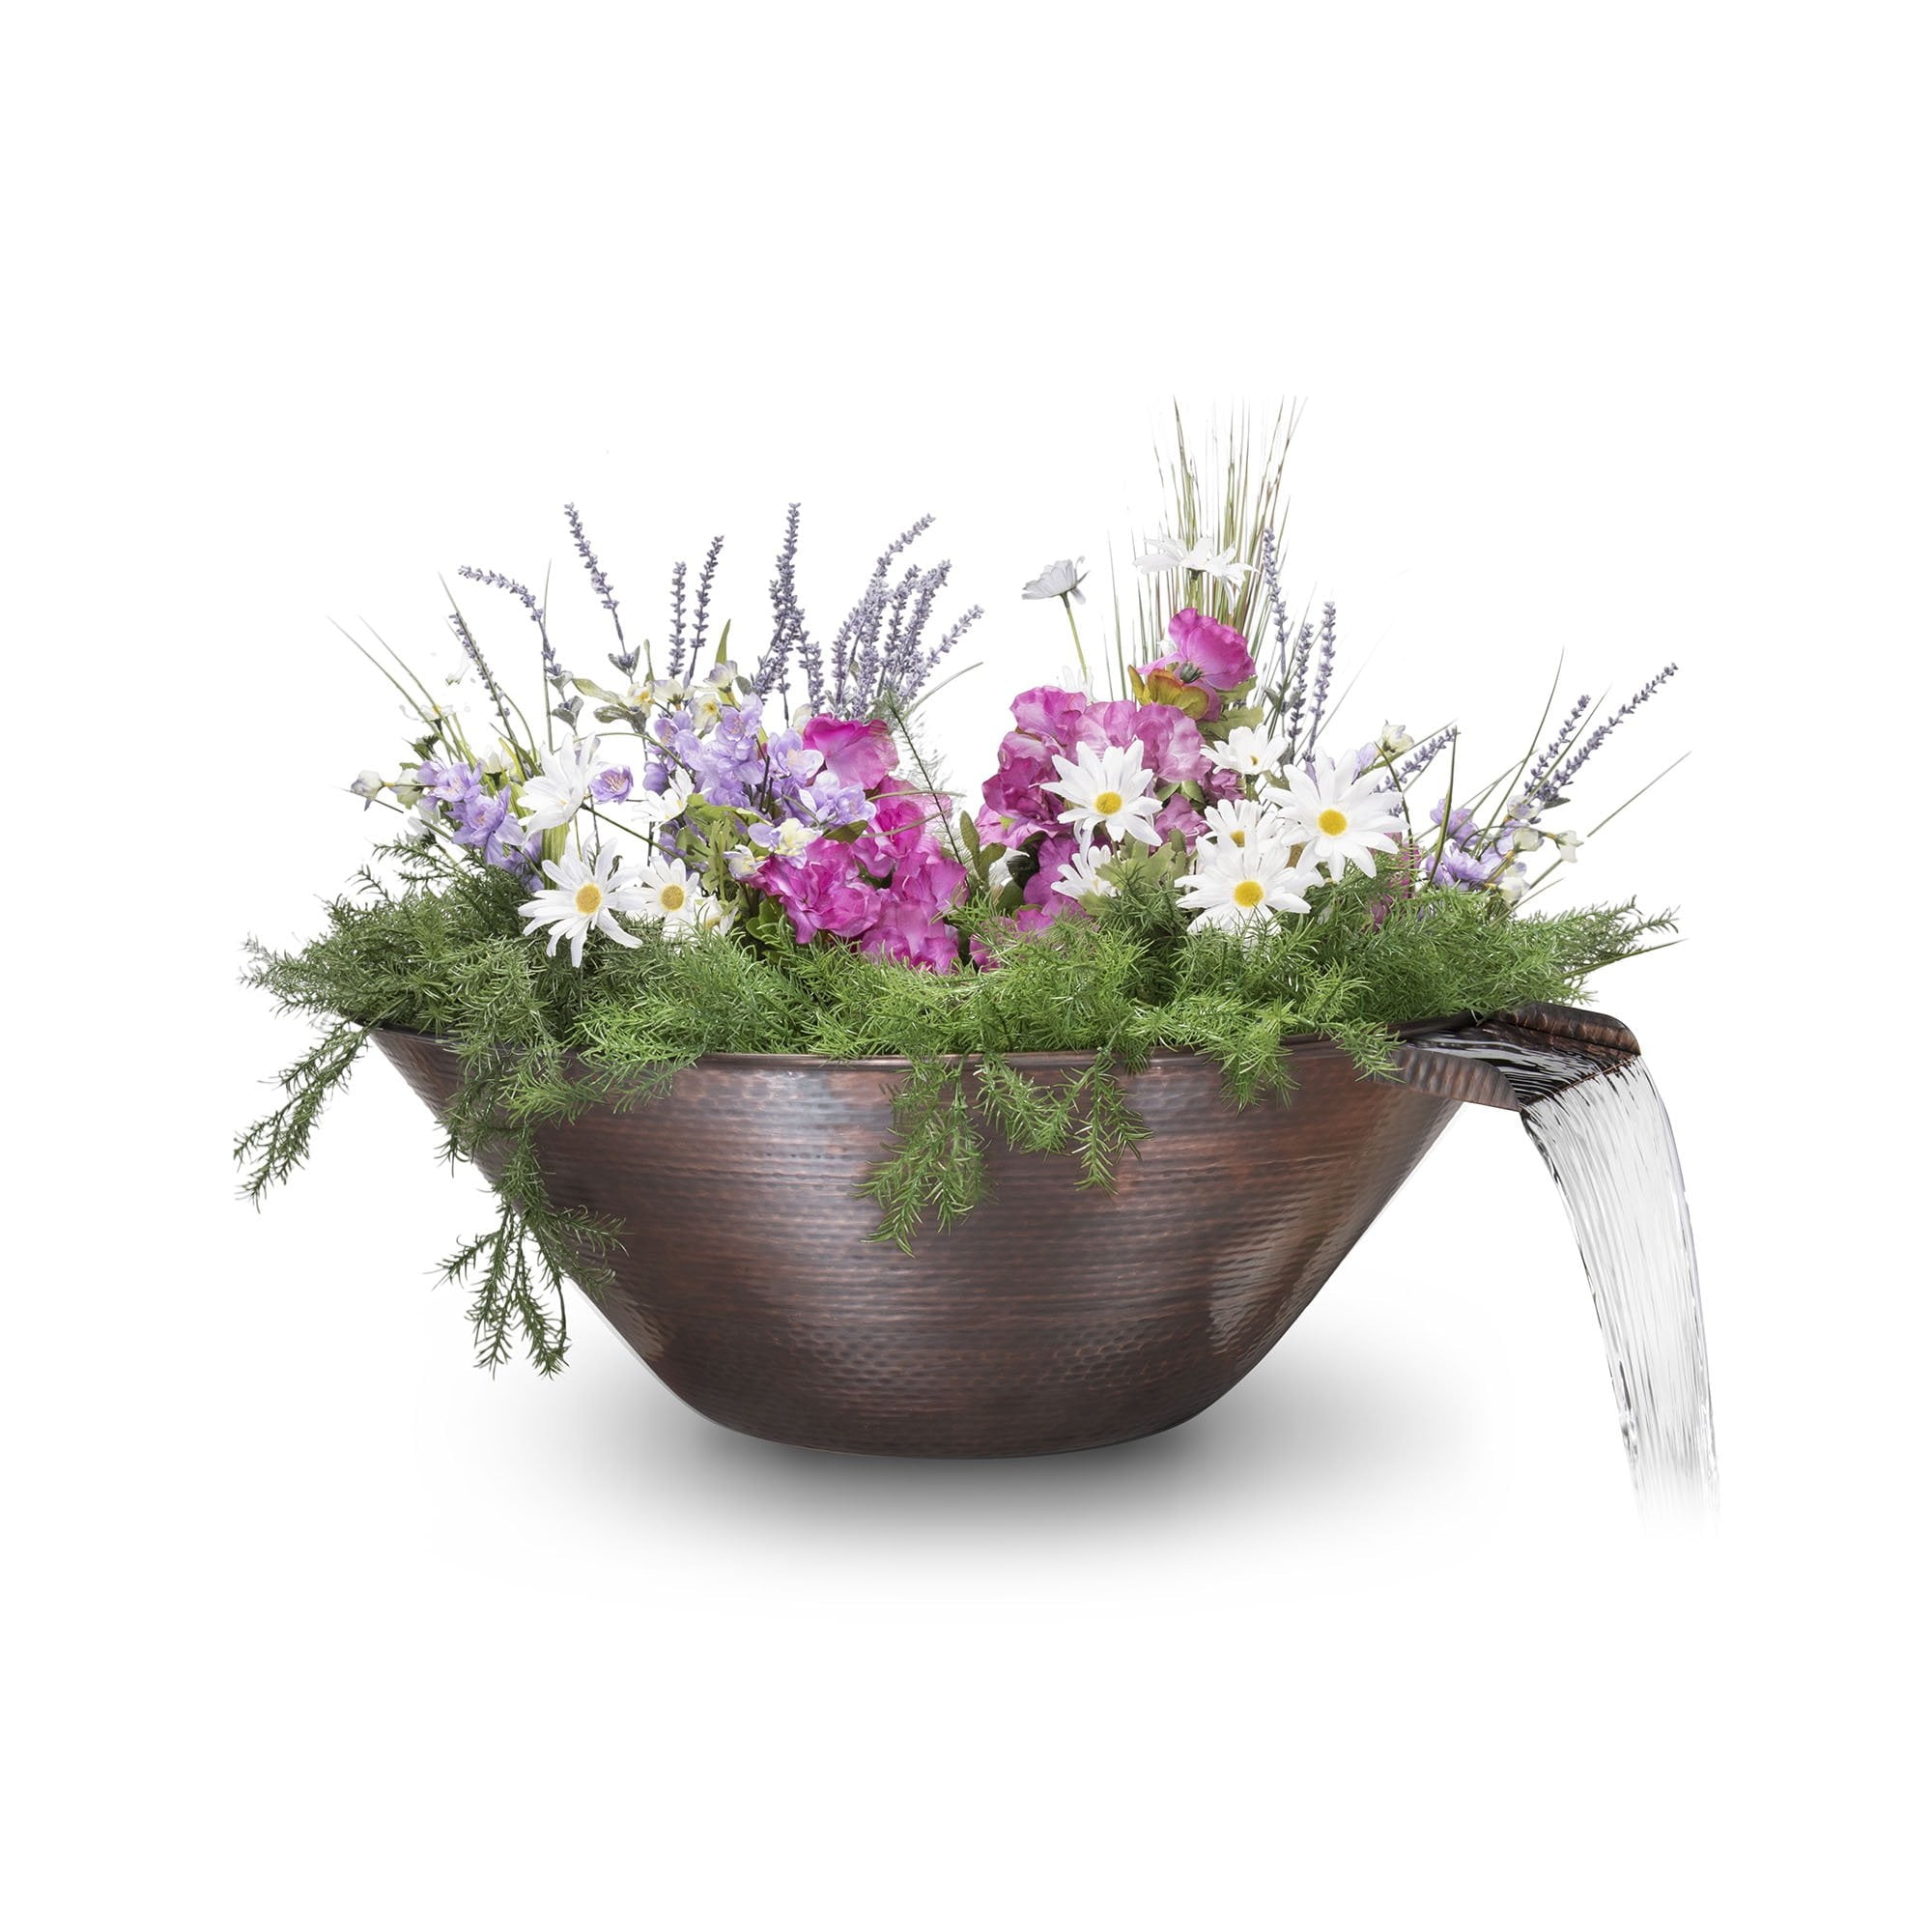 The Outdoor Plus Remi Planter & Water Bowl in Copper